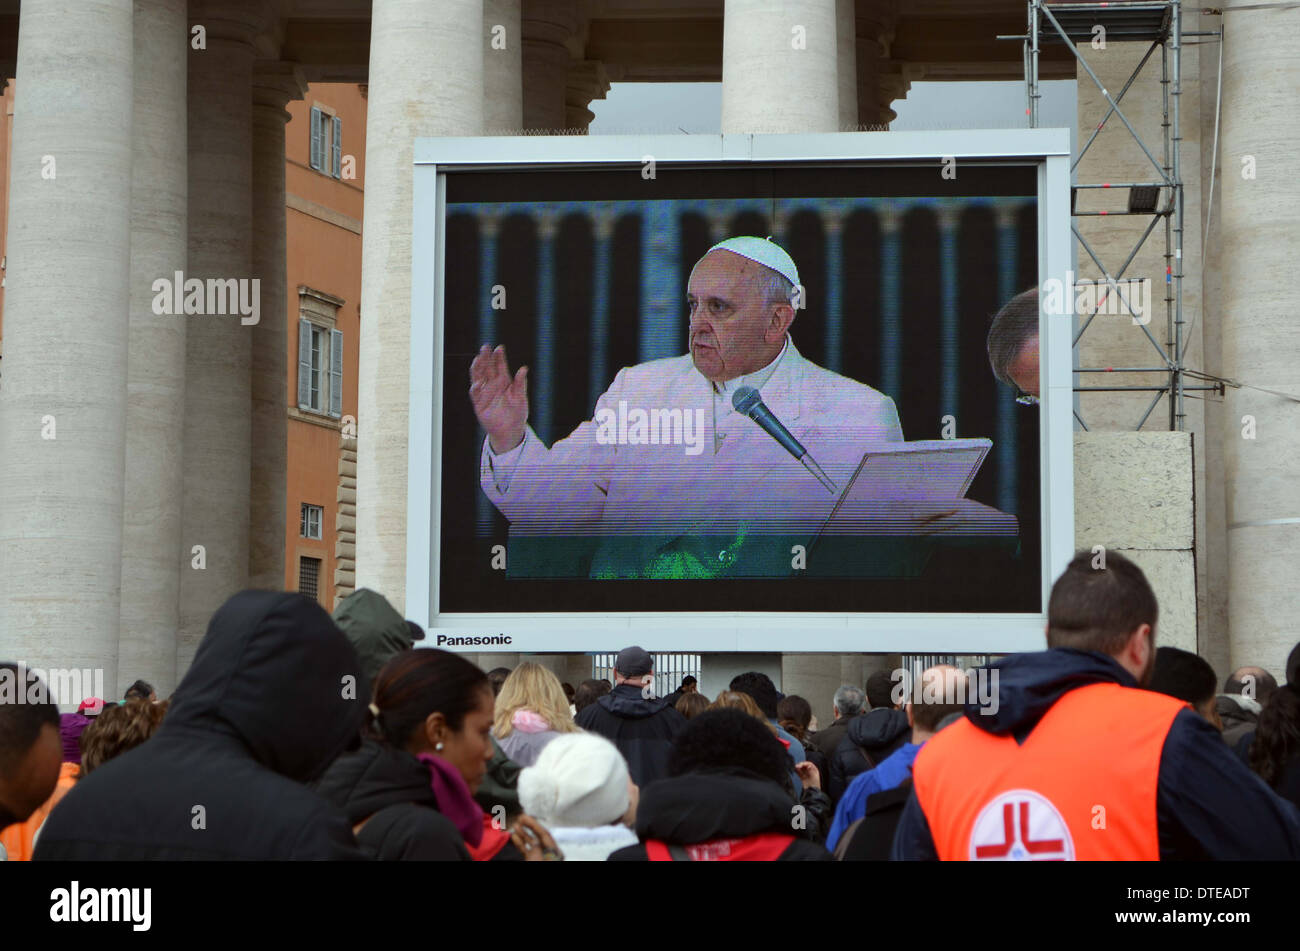 The Pope appears on the telly viewer to the crowds in Rome.This is directly outside               St.Peter's church inthe square Stock Photo